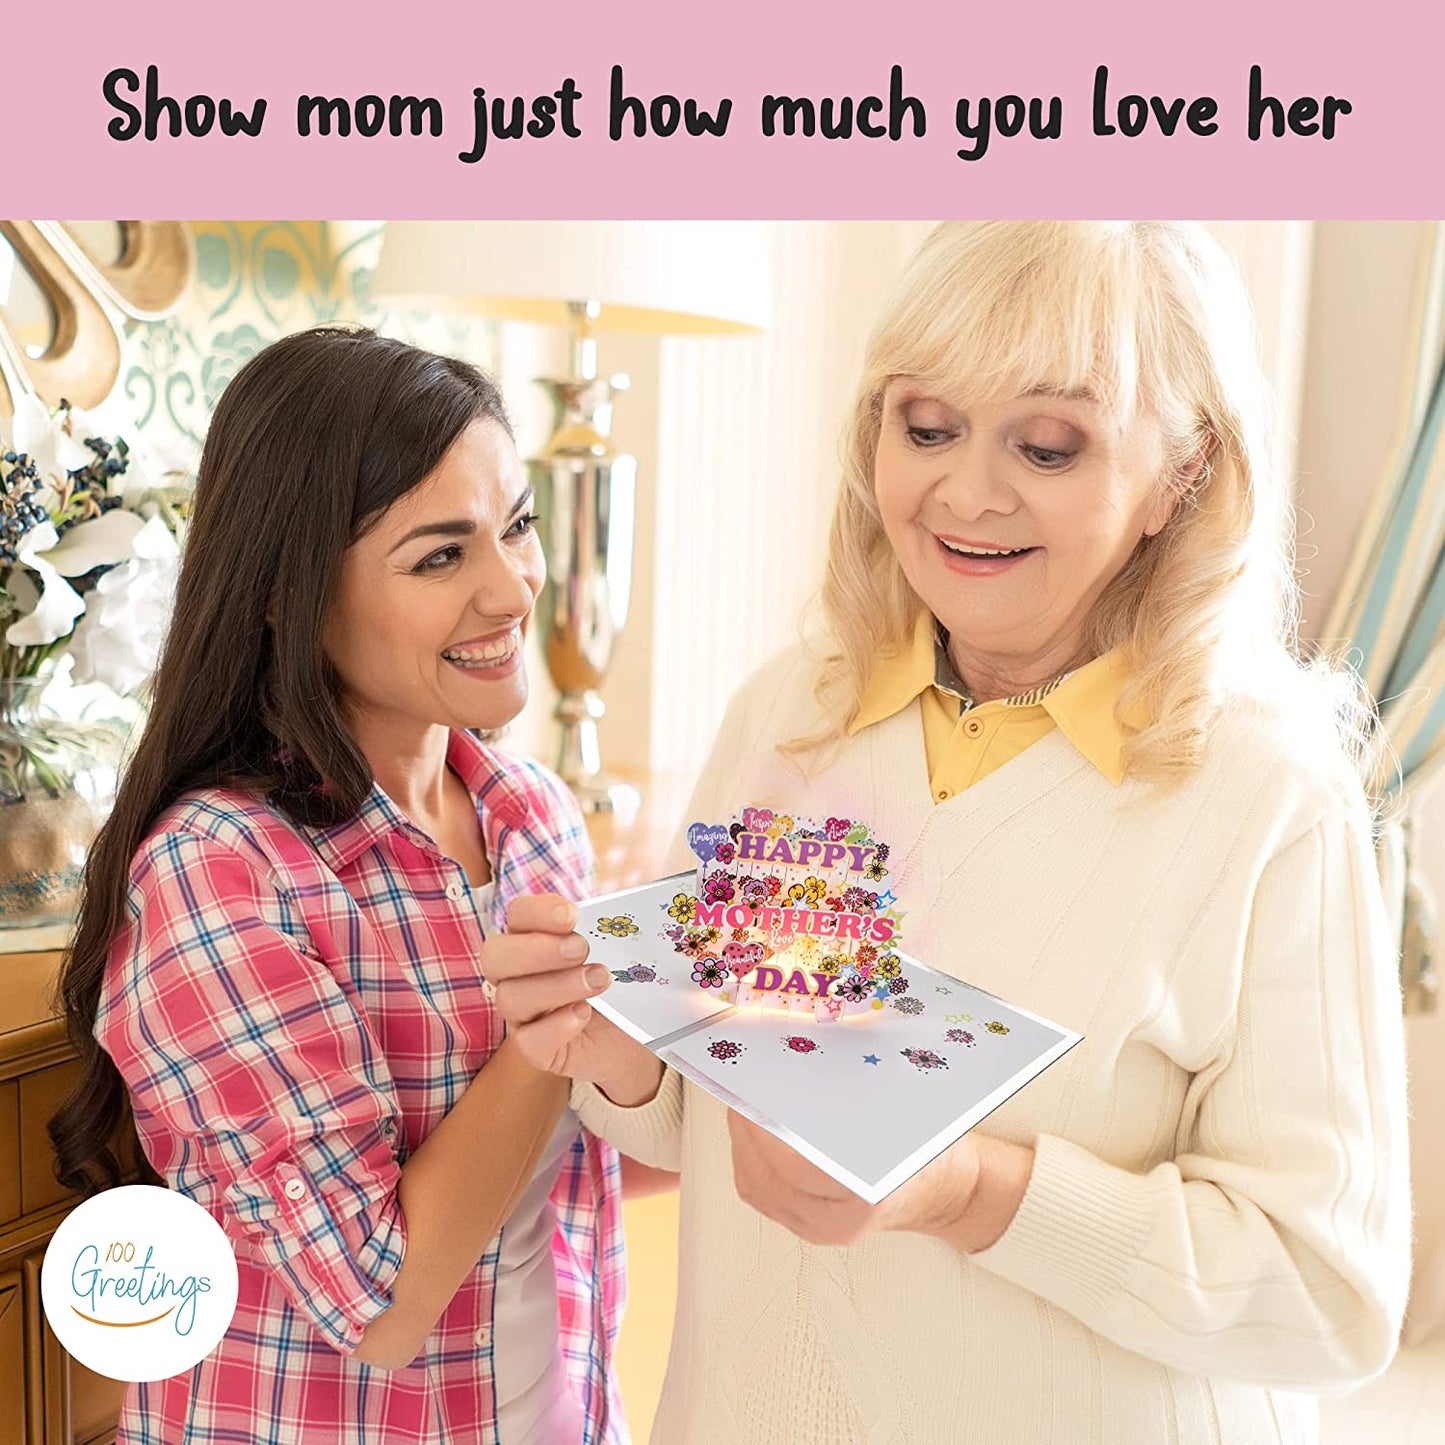 Happy Mother’s Day Words Card